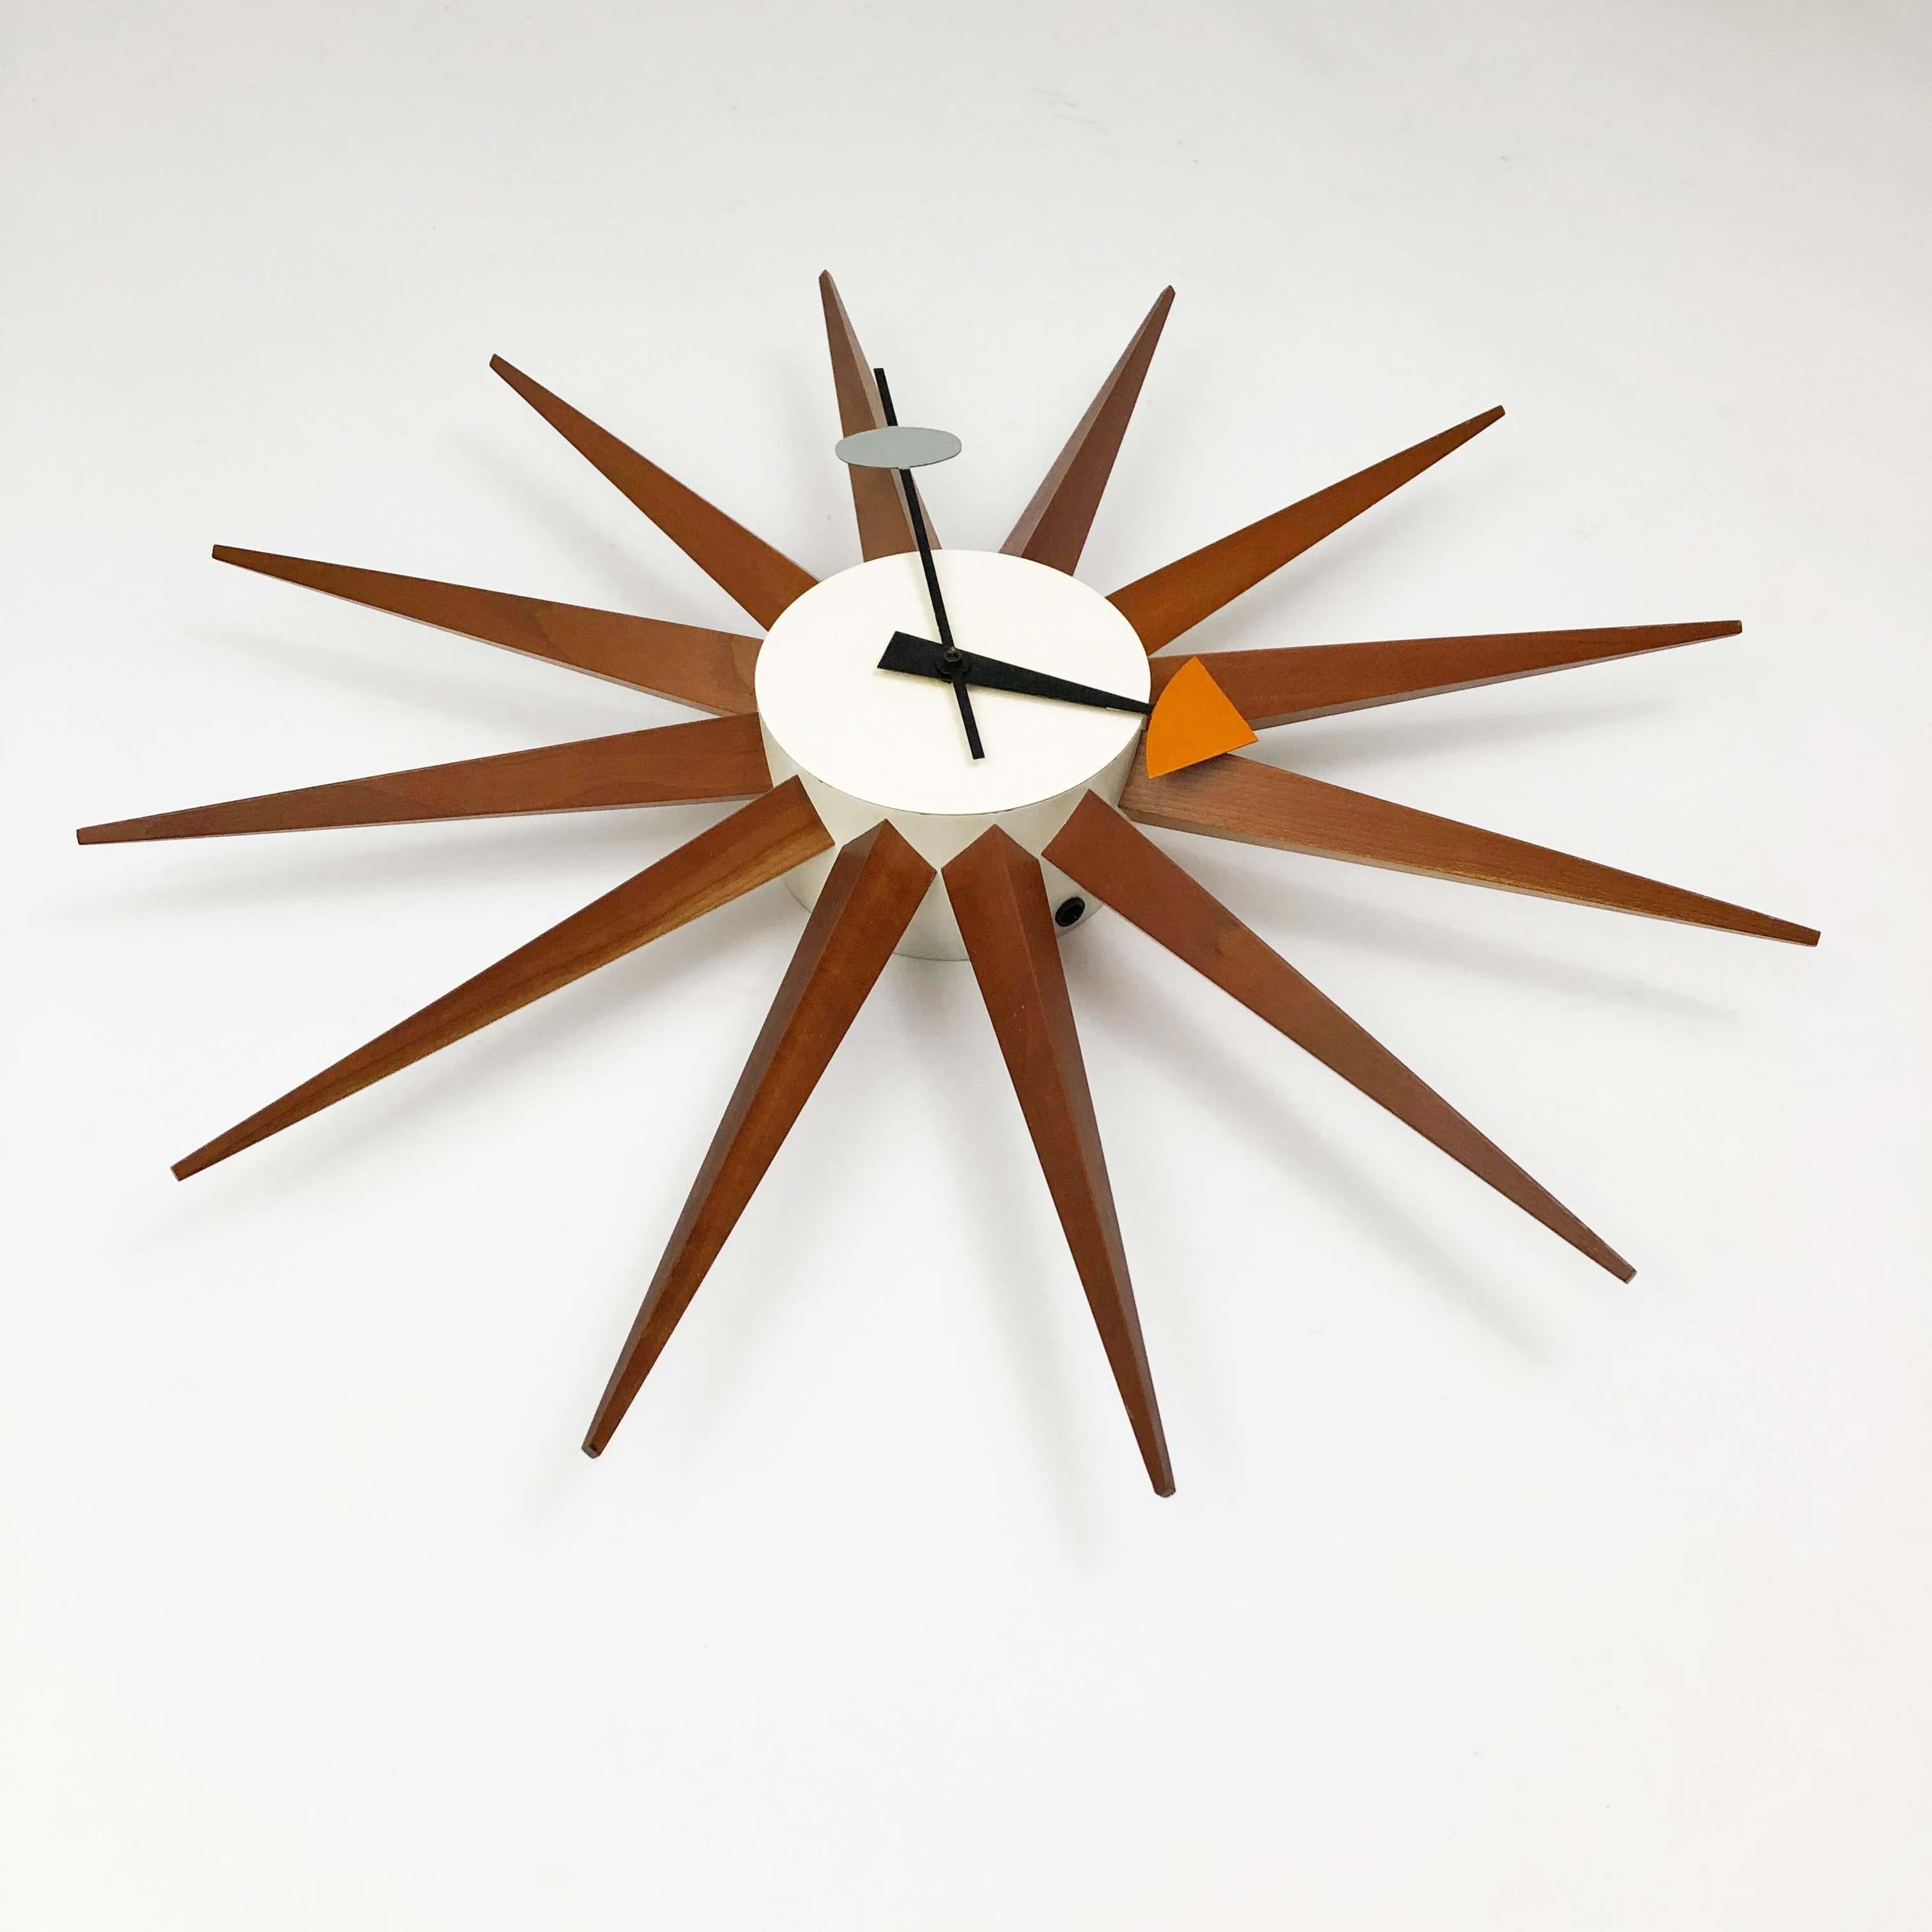 Striking classic George Nelson Model 2202 spike sunburst clock for Howard Miller. 

Walnut and enameled metal. Very good original condition.

Original Synchron movement. See photo.

The original pigtail cord has been replaced with an 8-foot